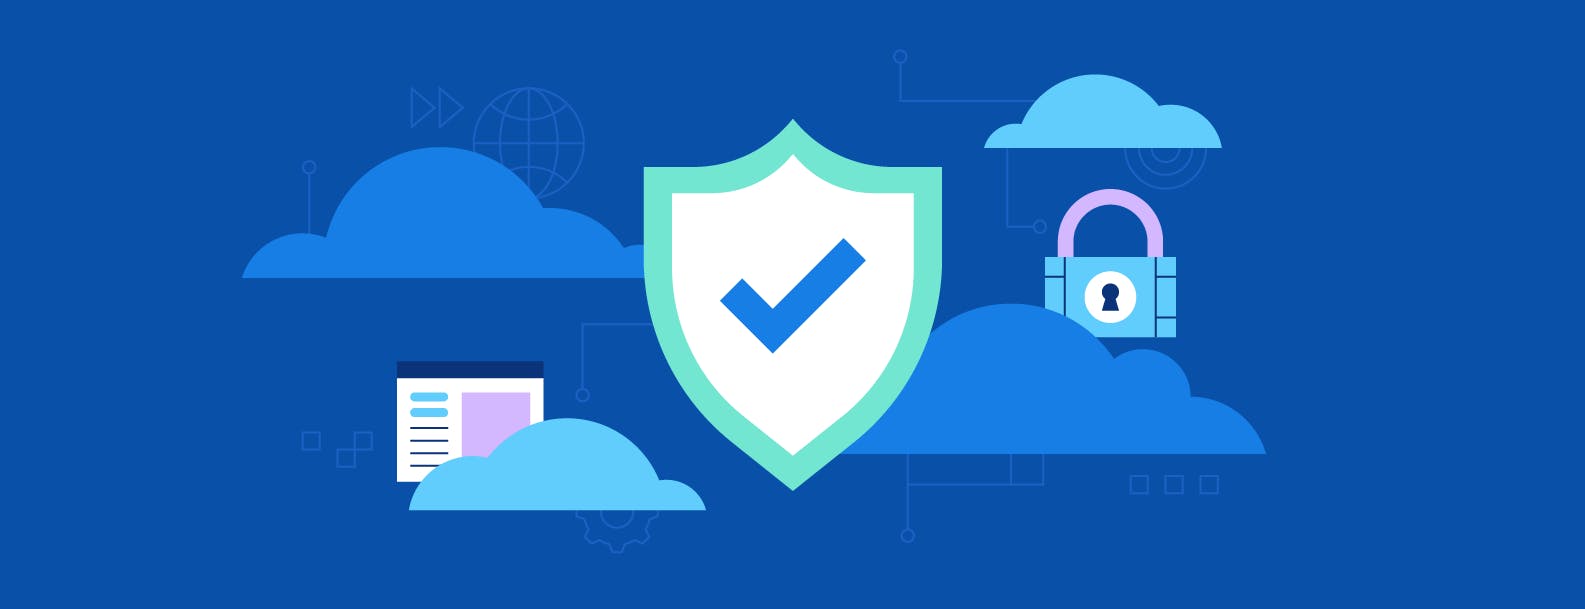 Cloud Compliance: What It Is + 8 Best Practices for Improving It